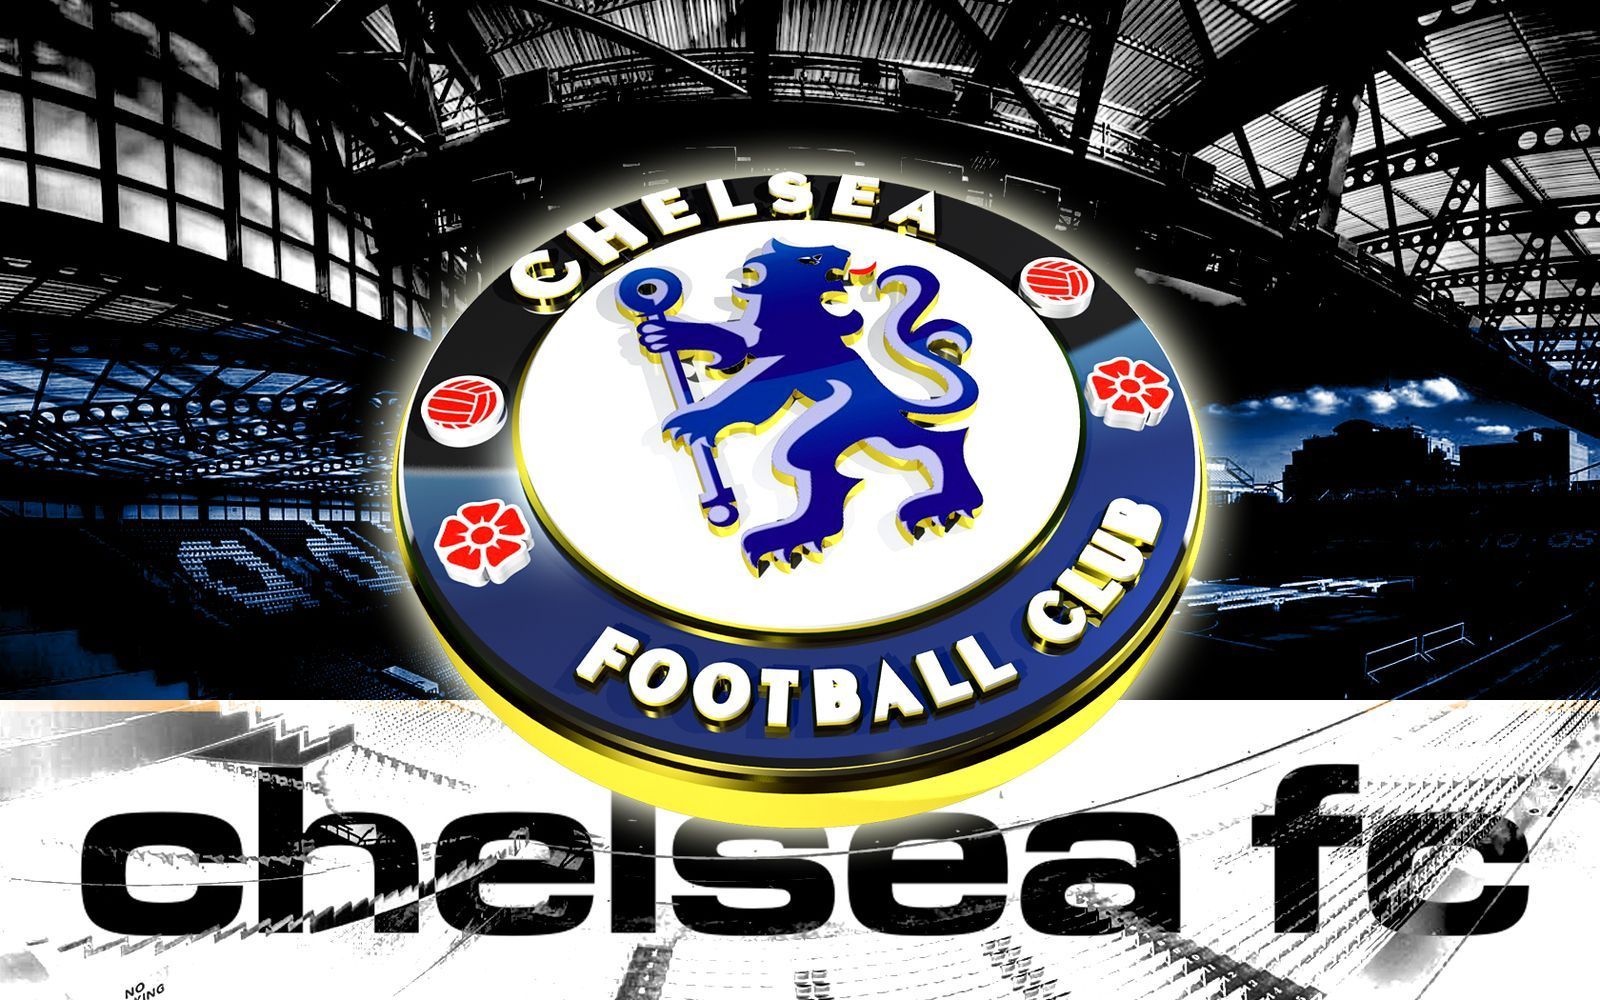 Gallery for - download wallpaper chelsea fc